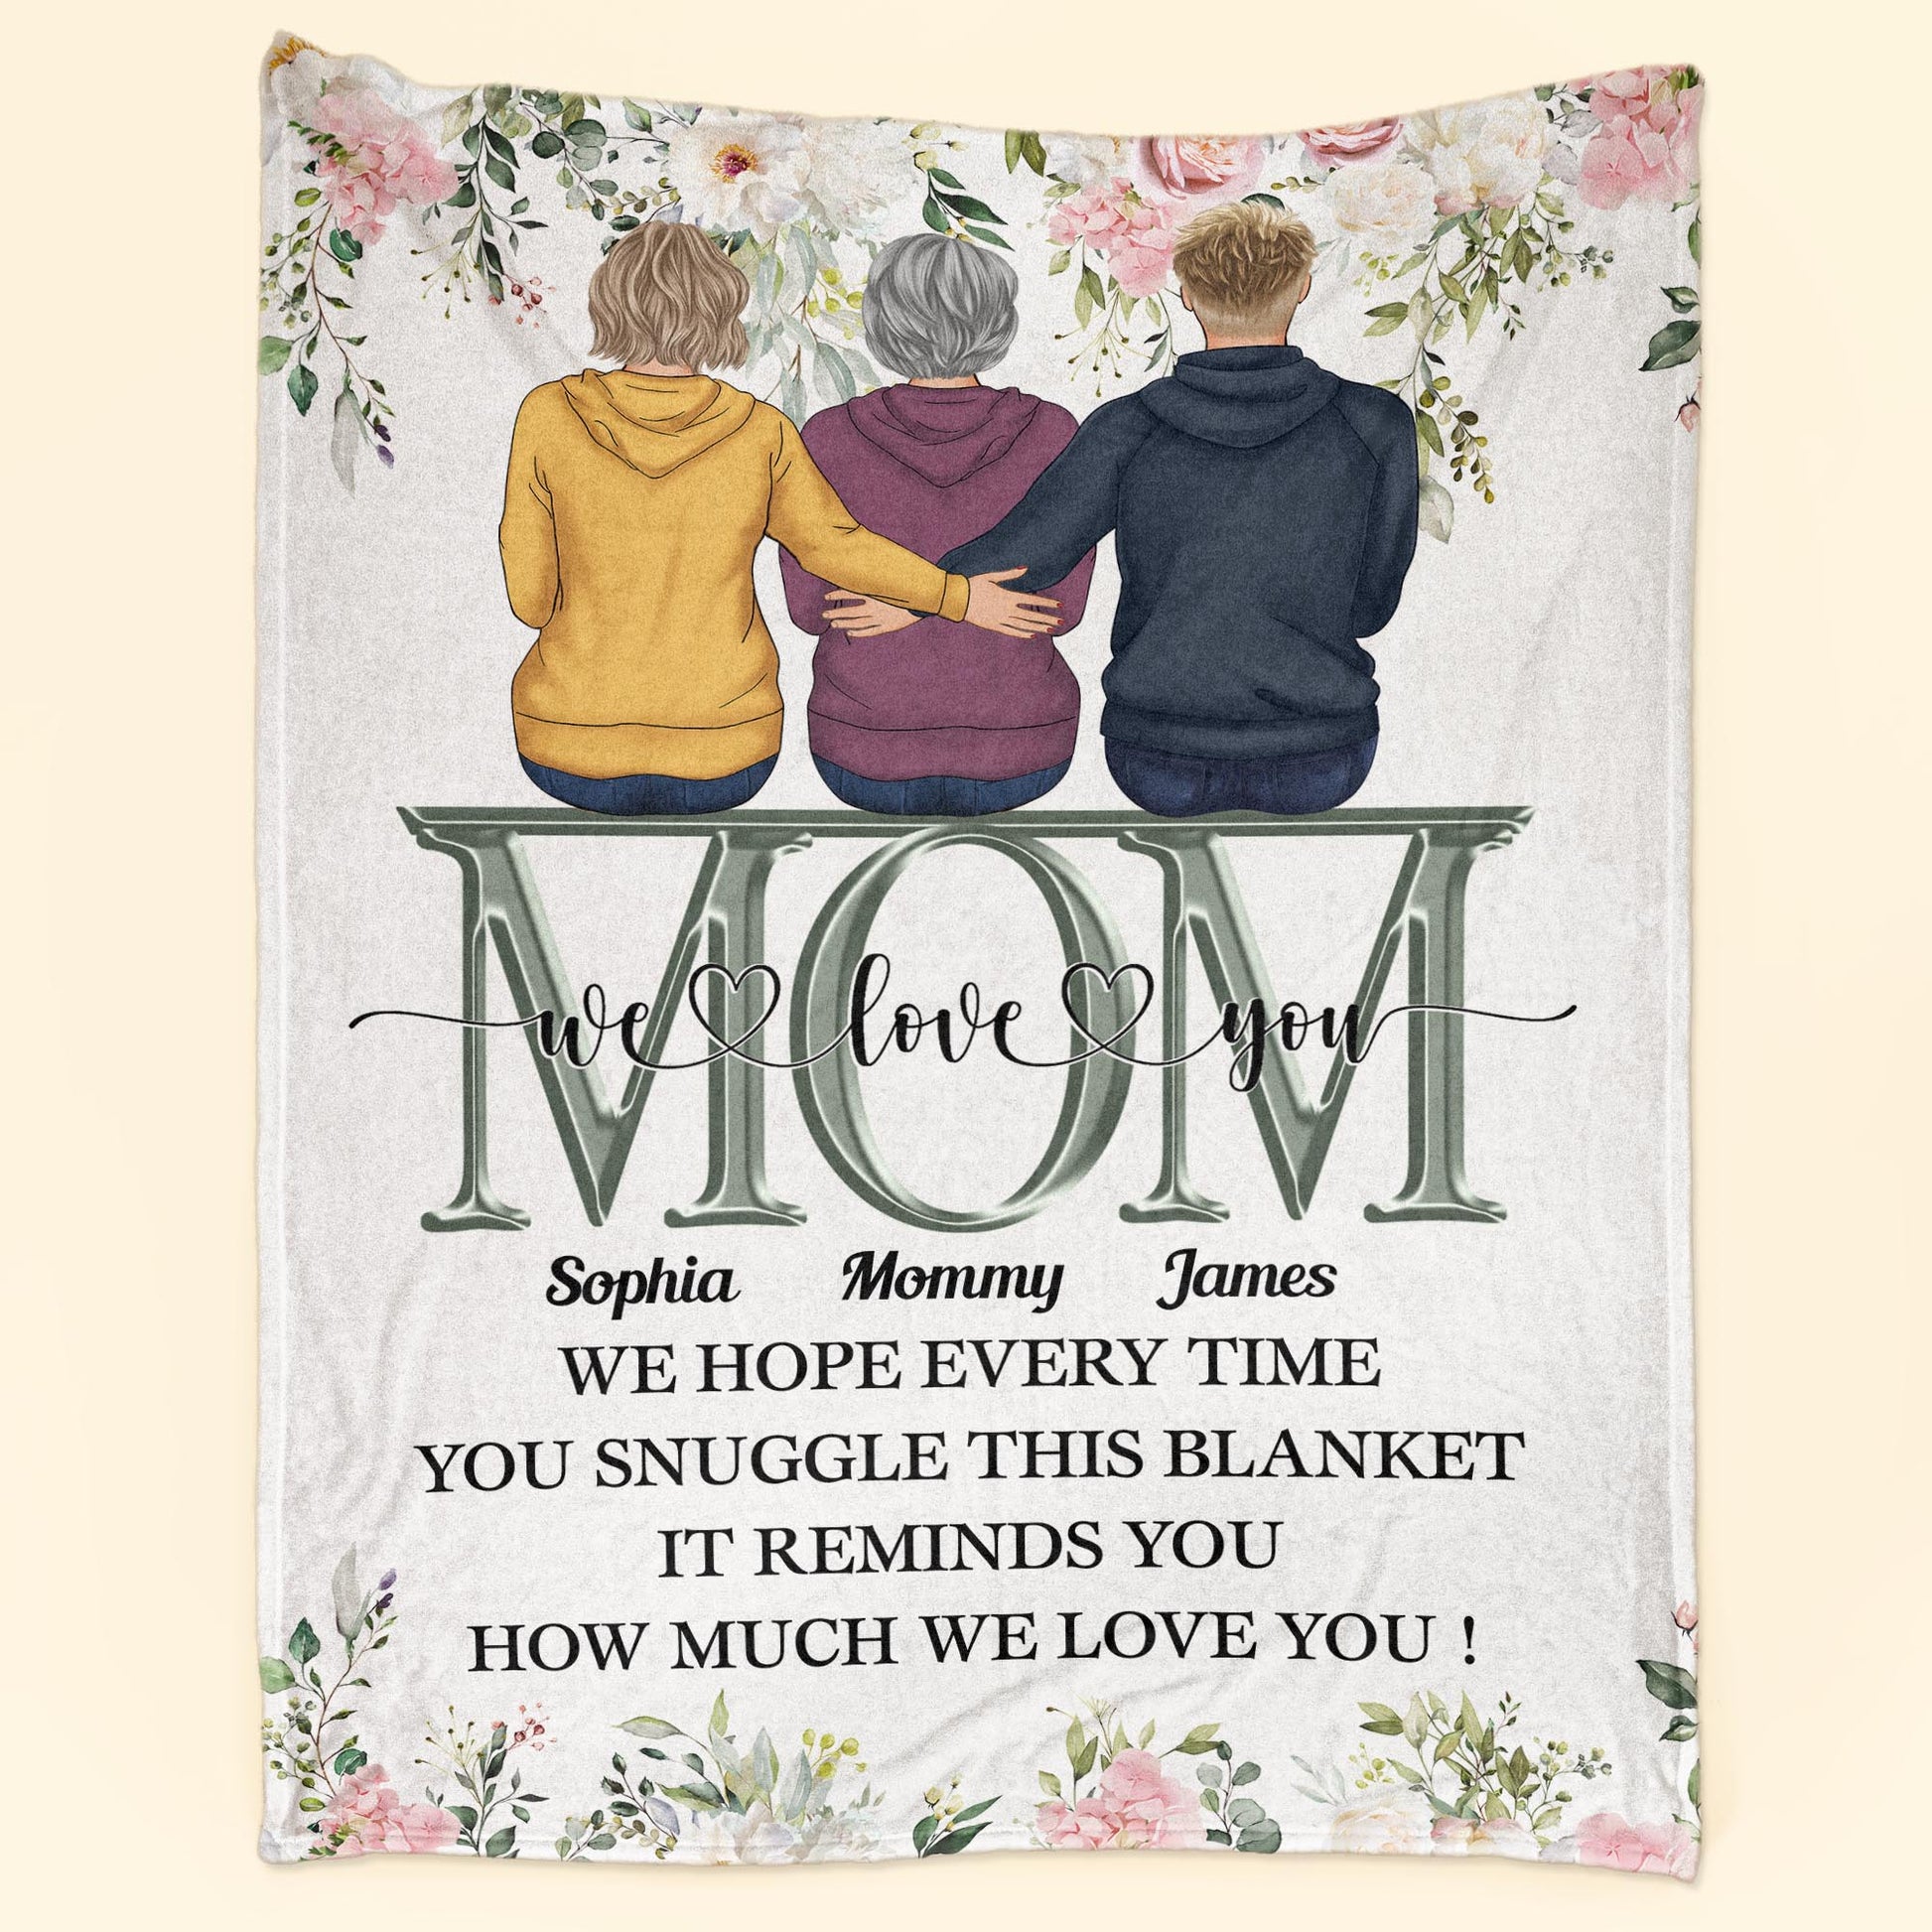 This Blanket Reminds You How Much We Love You - Personalized Blanket - Birthday, Mother's DayGift For Mom, Mother, Mama